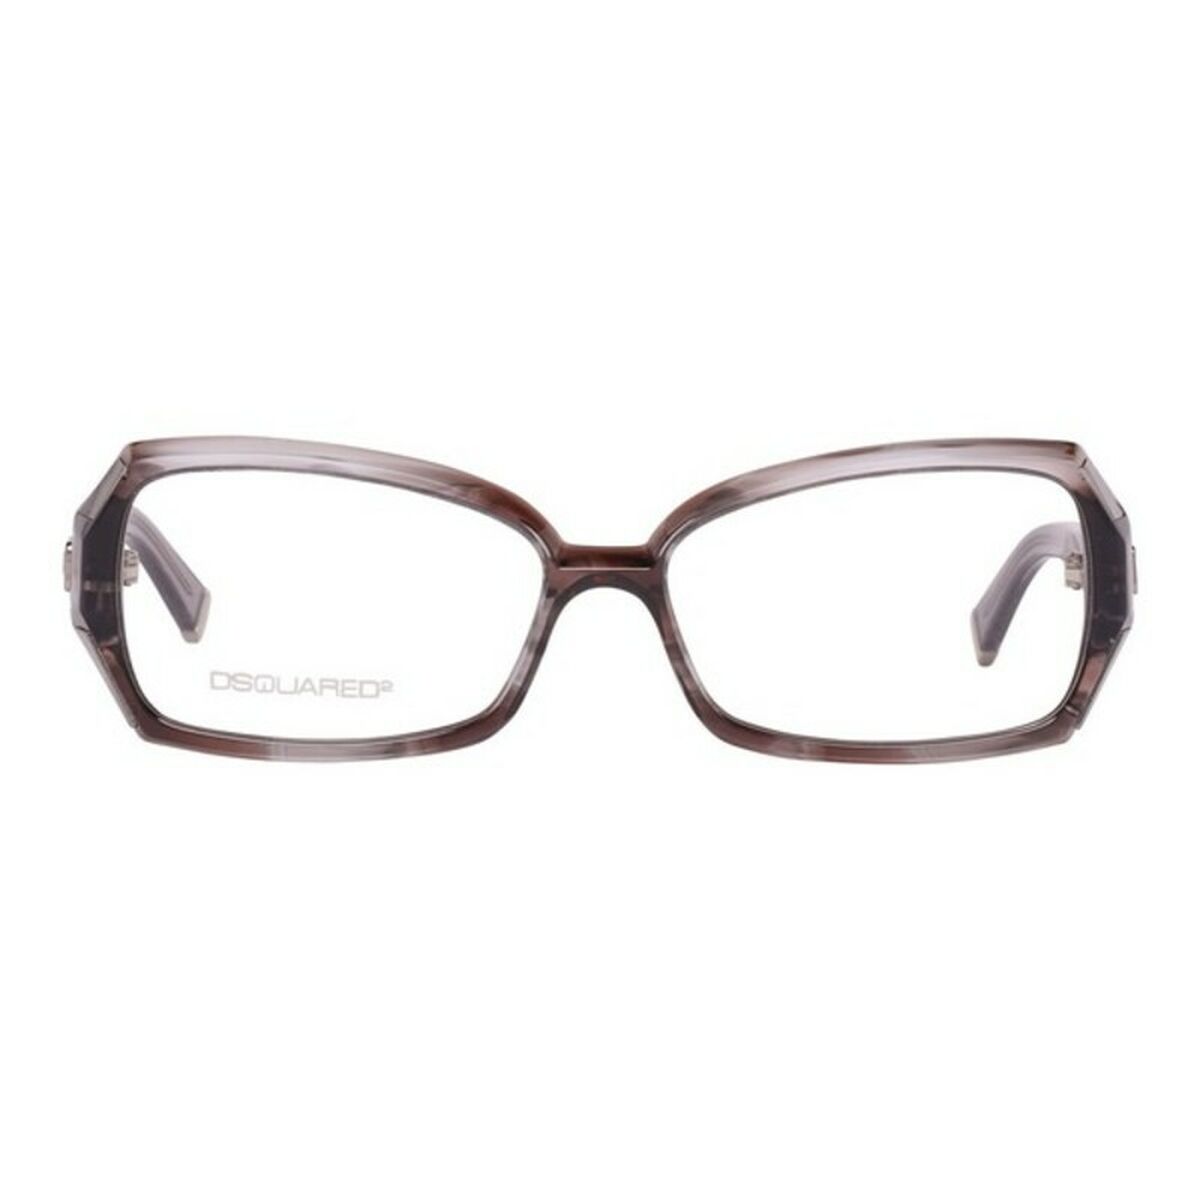 Ladies' Spectacle frame Dsquared2 DQ5049 54020 ø 54 mm